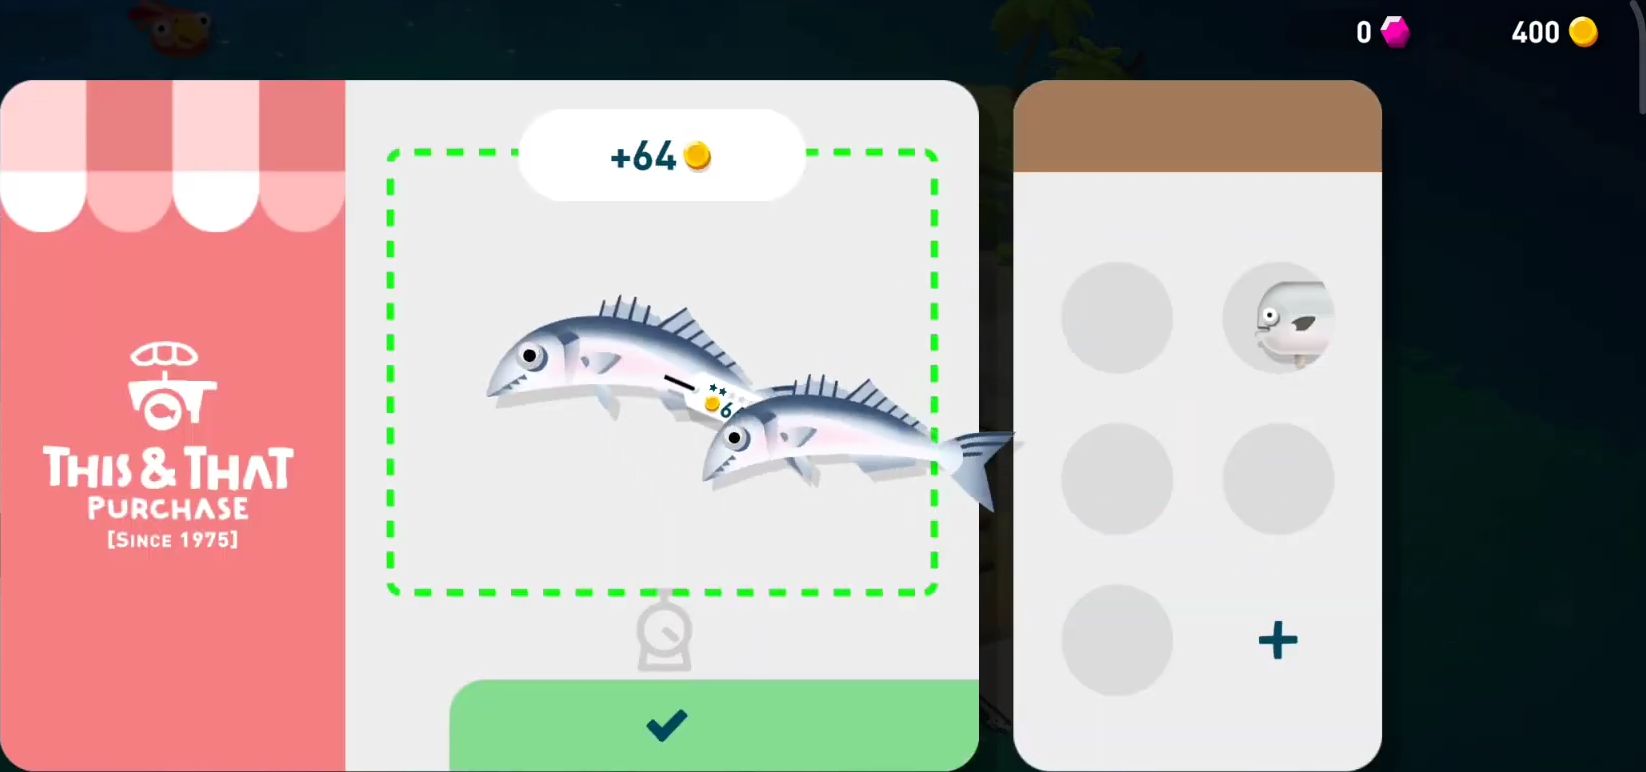 Download Creatures of the Deep: Fishing für Android kostenlos.